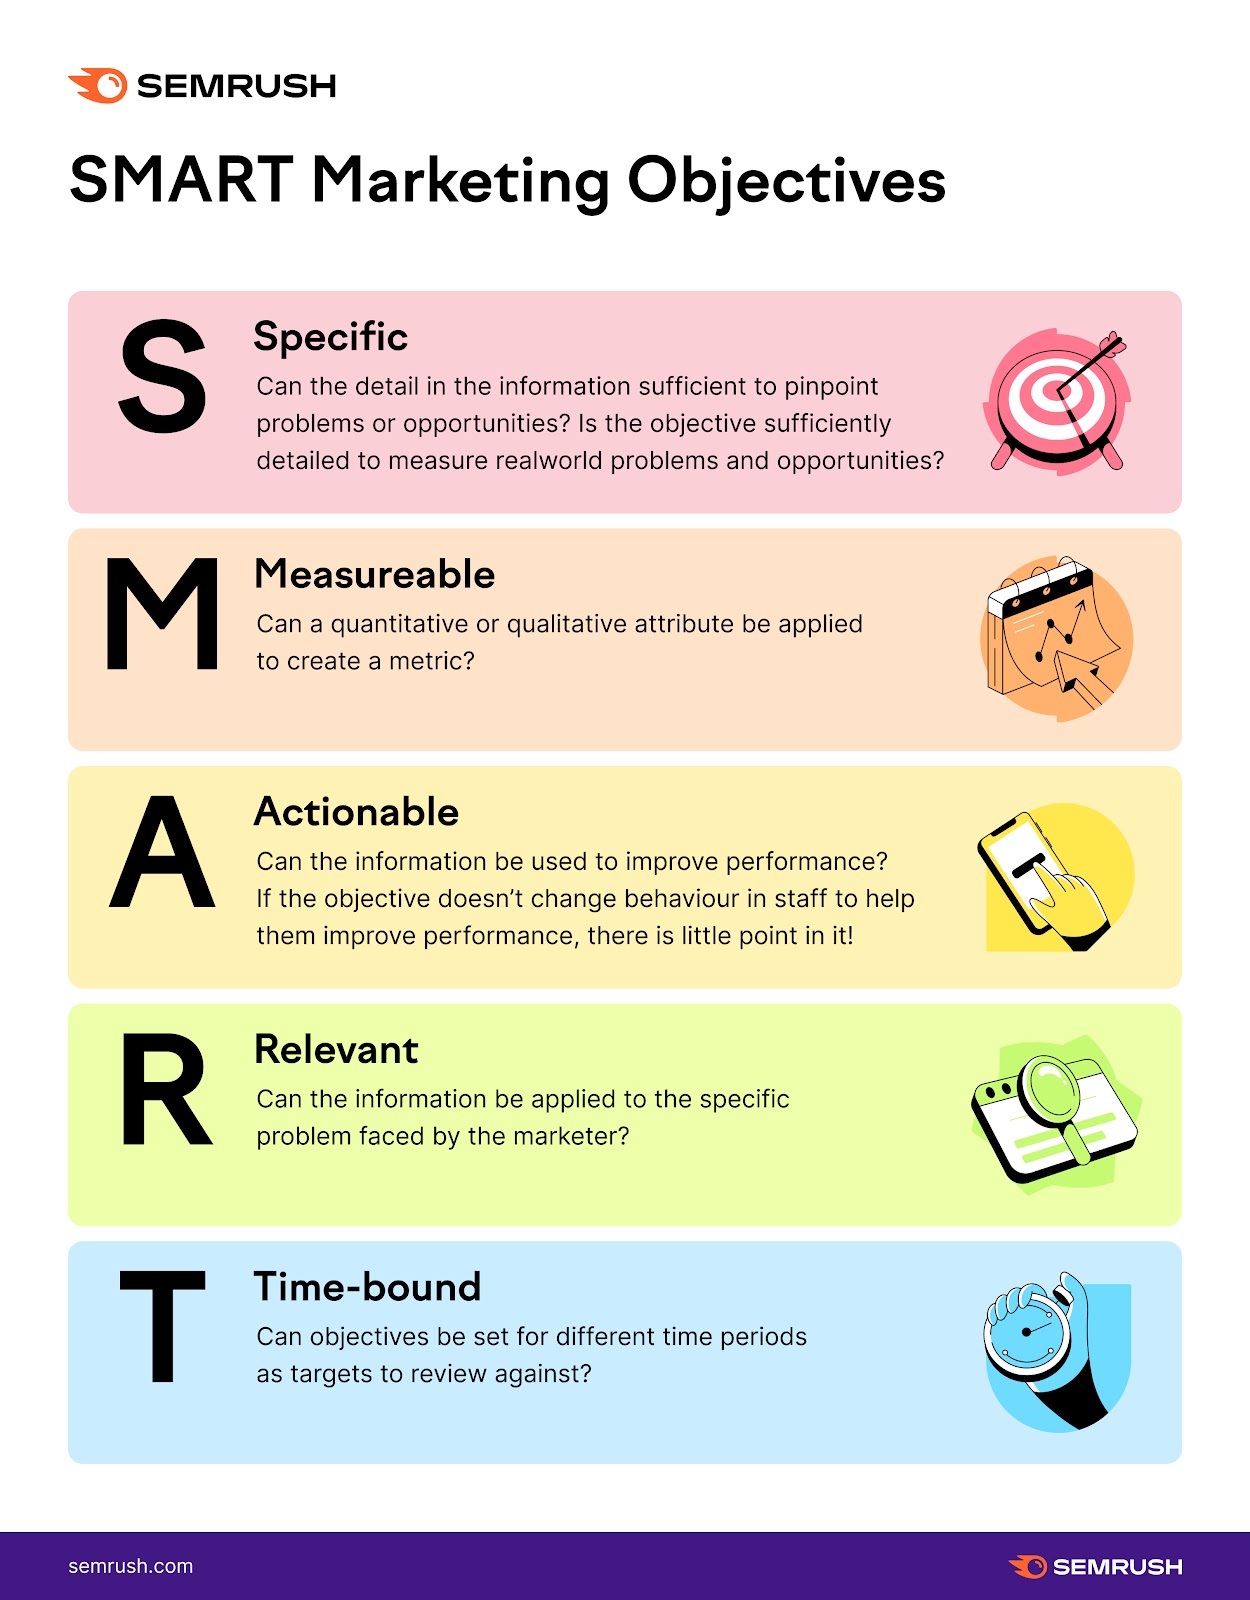 What SMART marketing objectives stand for